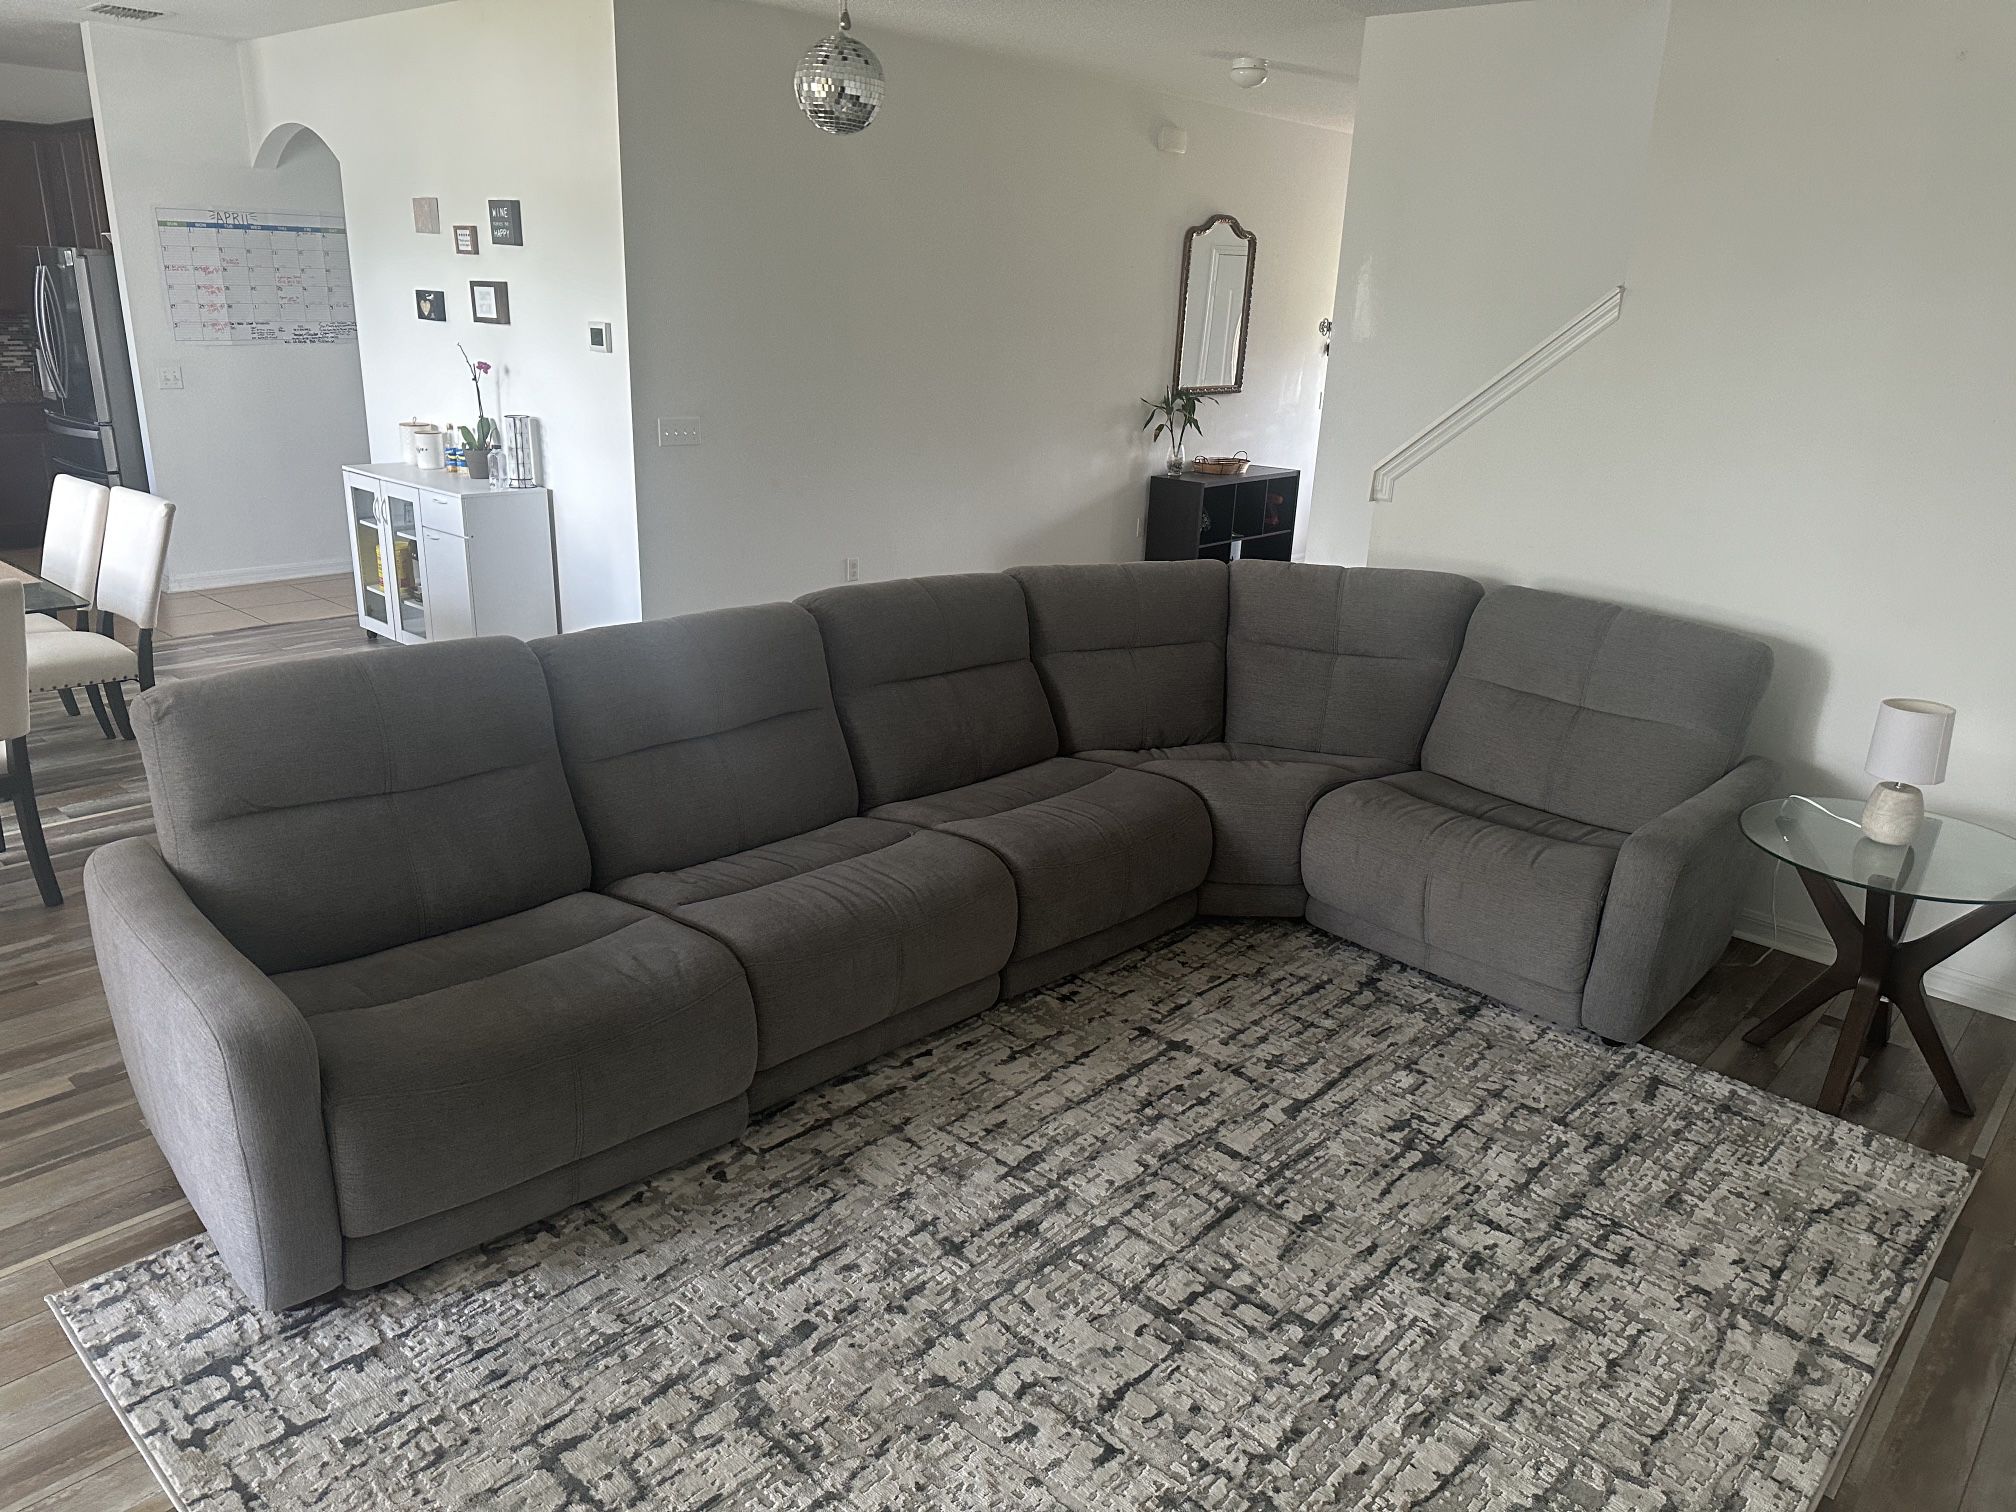 5 Piece sectional Couch